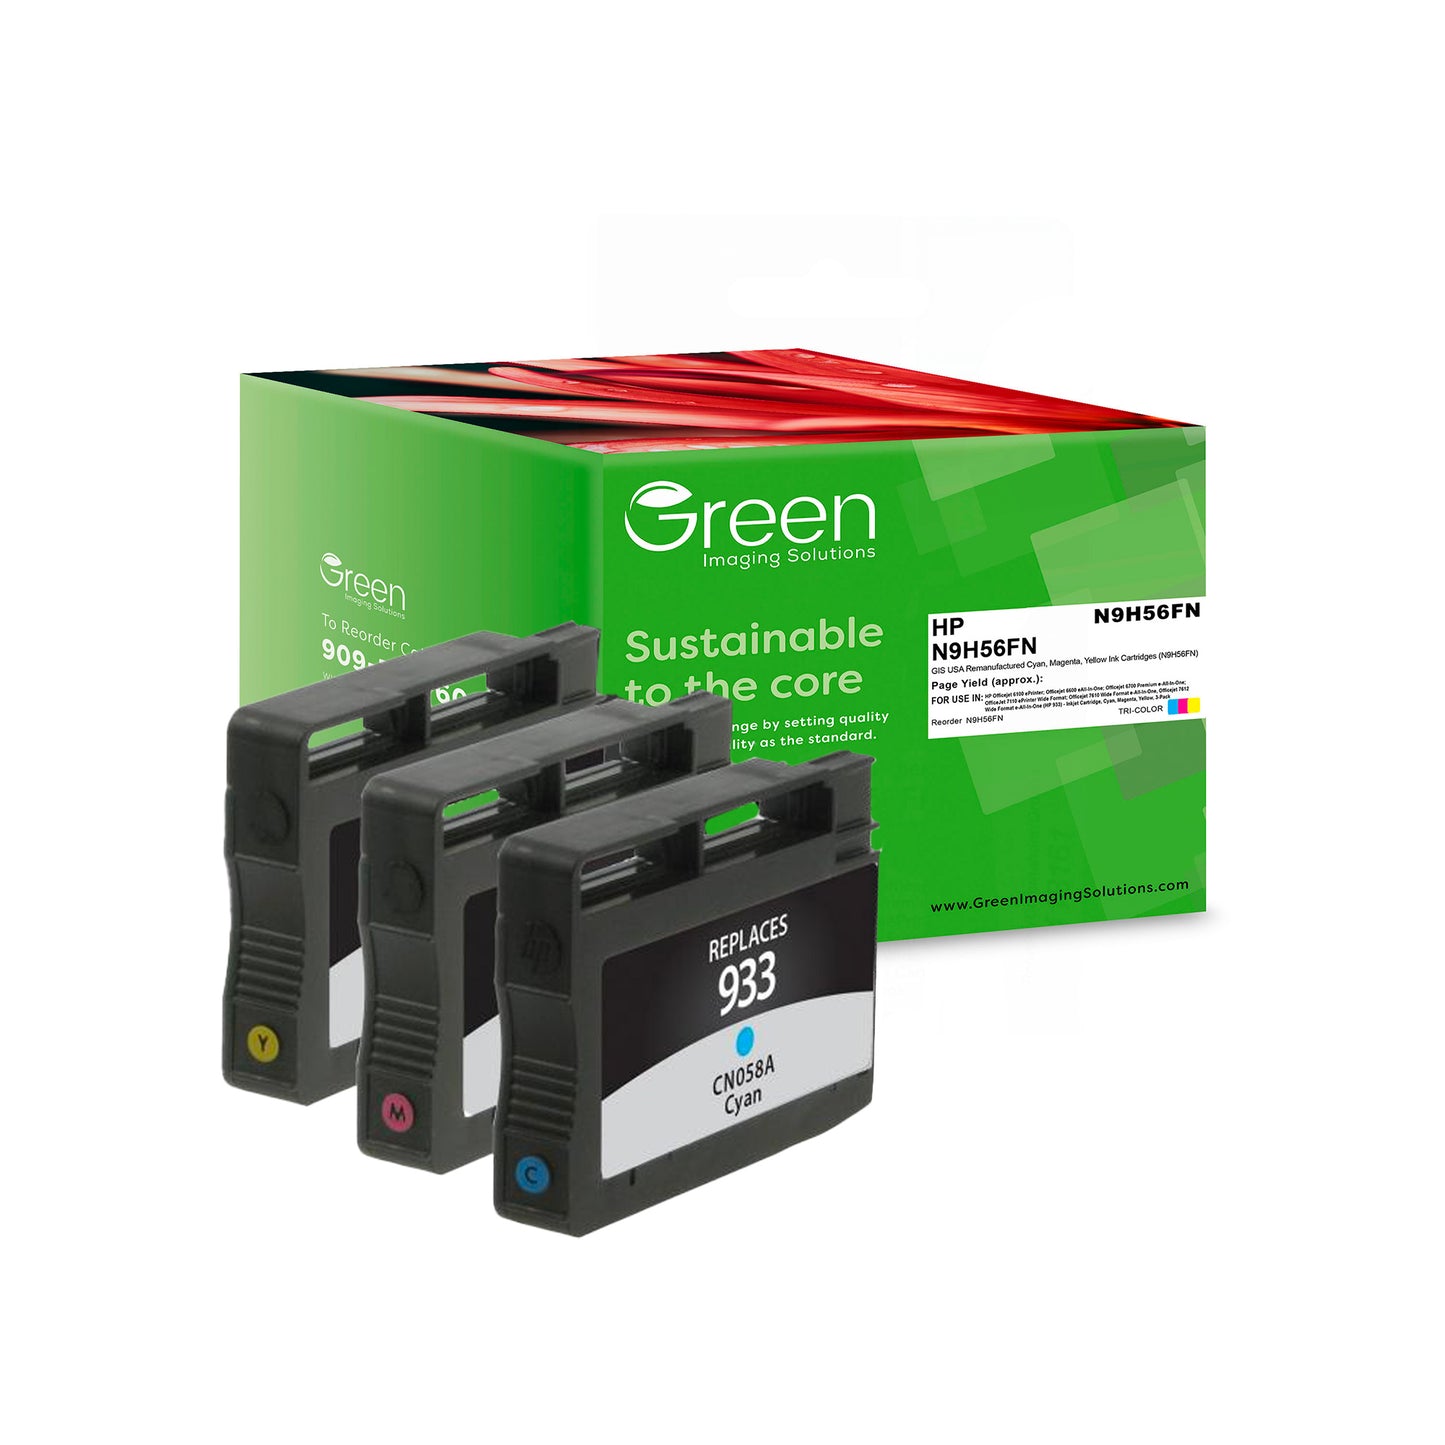 Green Imaging Solutions USA Remanufactured Cyan, Magenta, Yellow Ink Cartridges for HP 933 (N9H56FN) 3-Pack